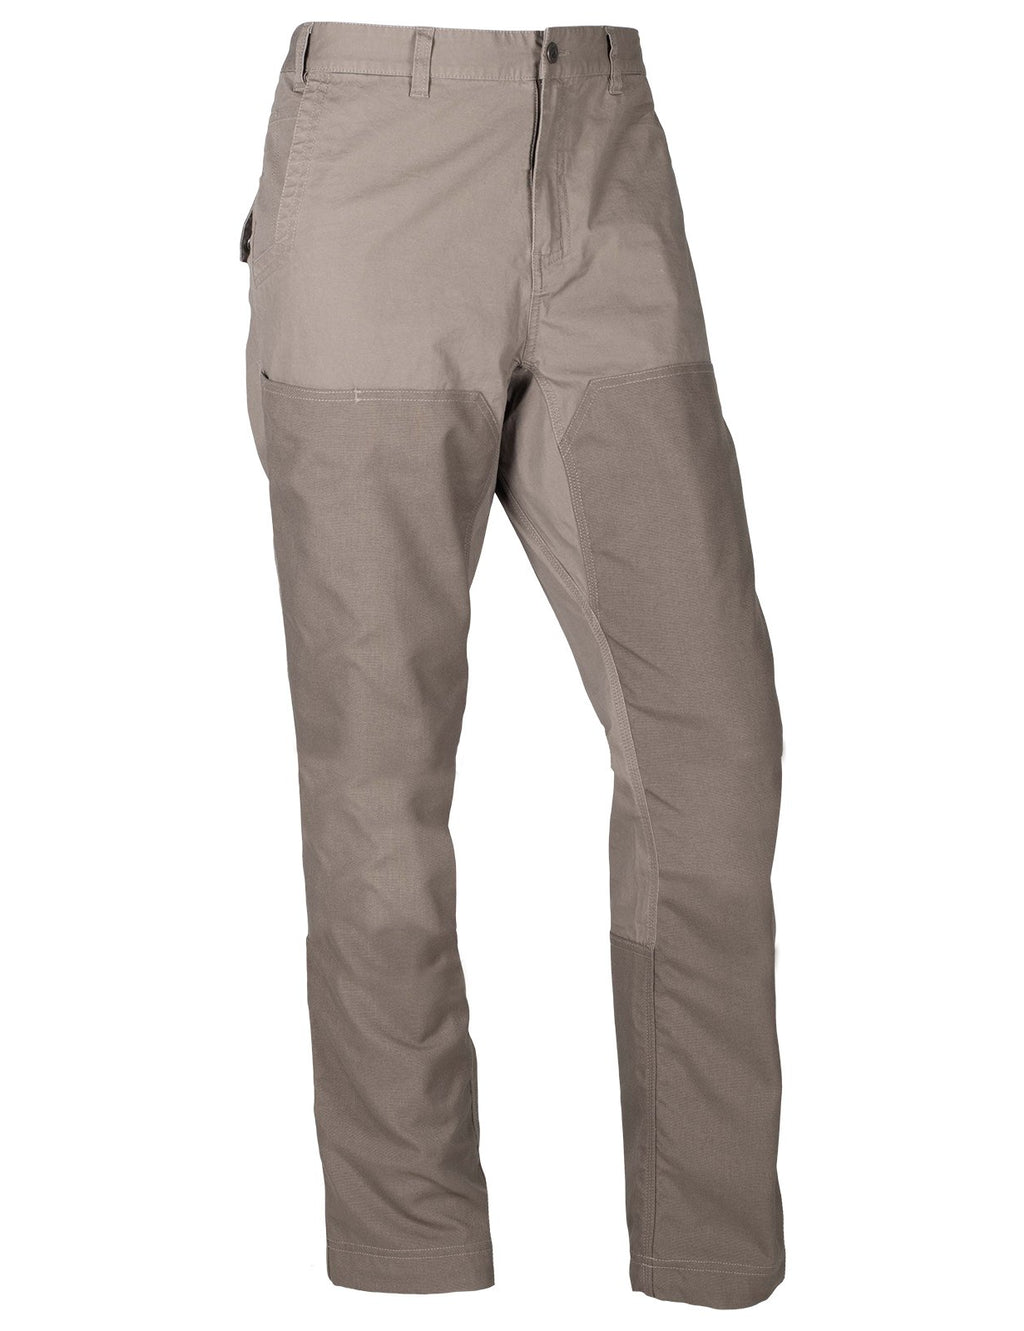 Men's Backland Brush Outdoor Hunting Pant